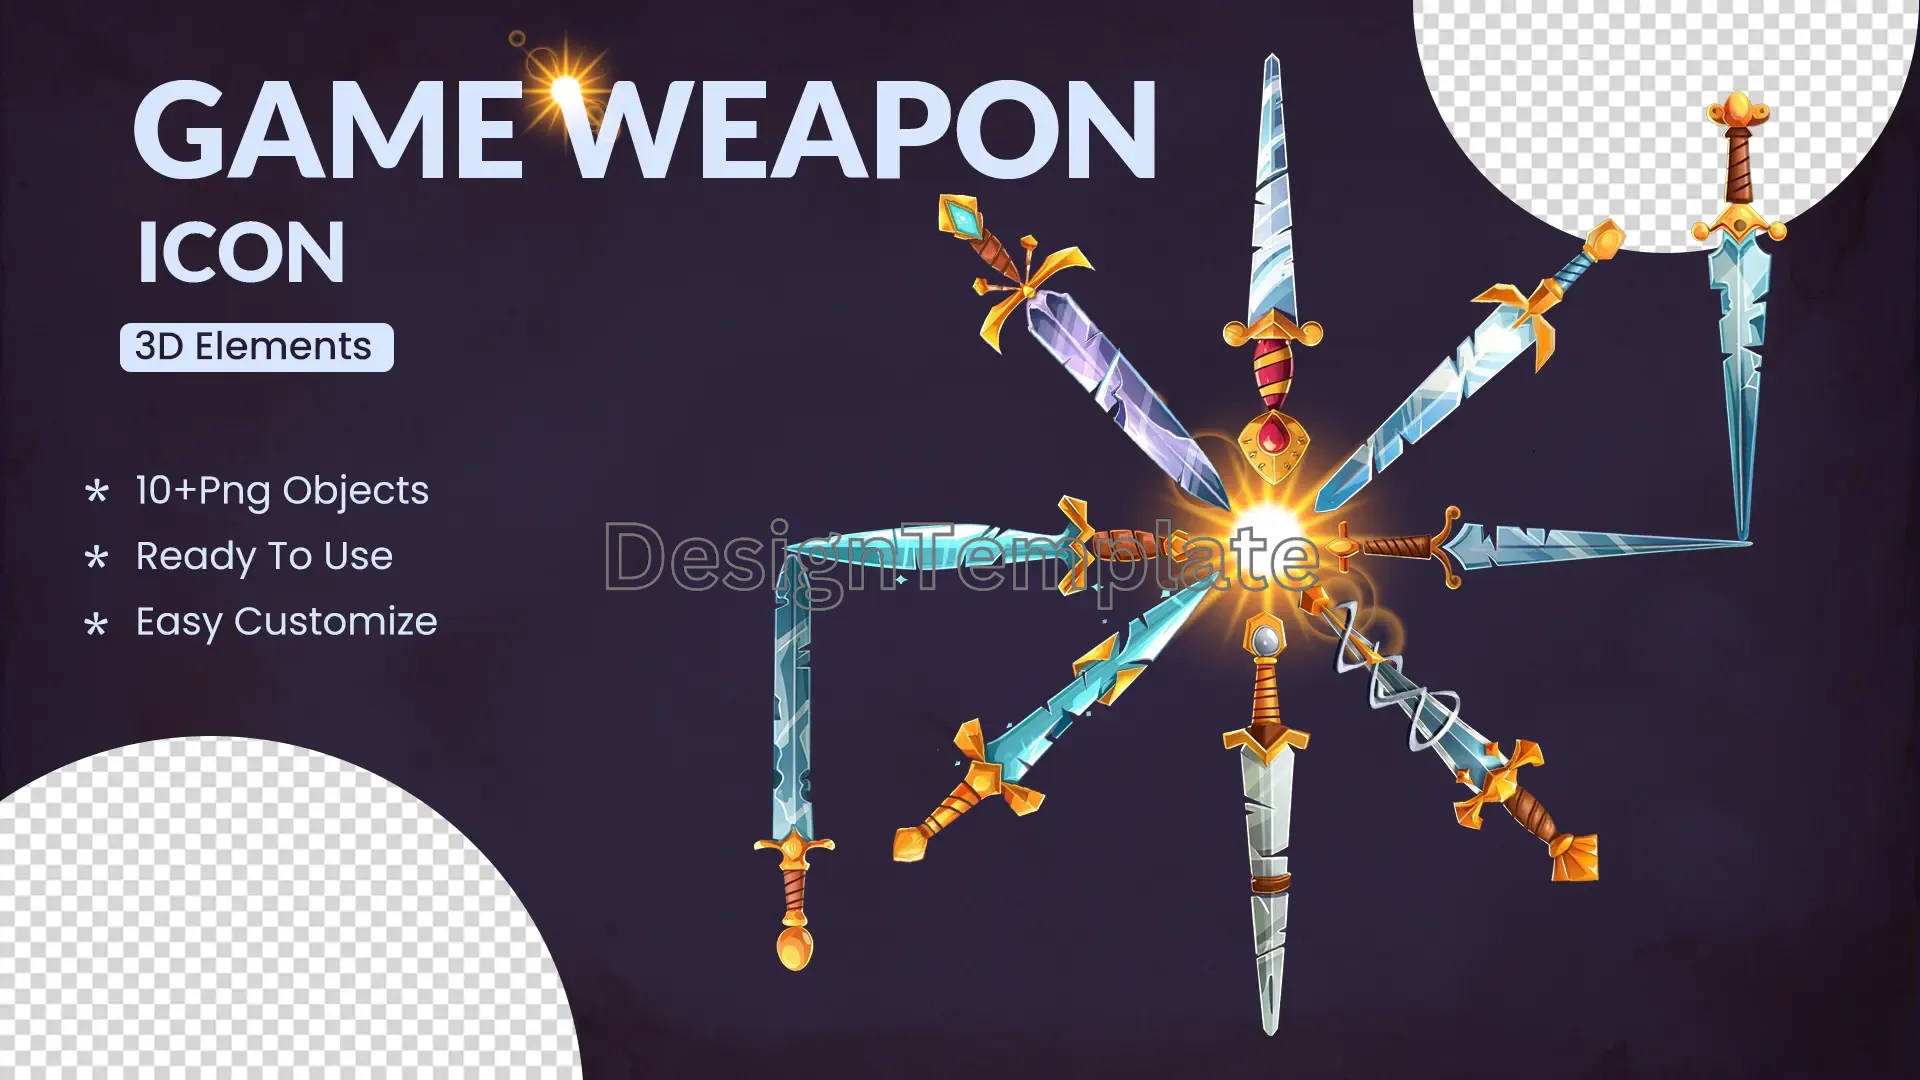 Arsenal Expansion Additional 3D Game Weapon Icons image